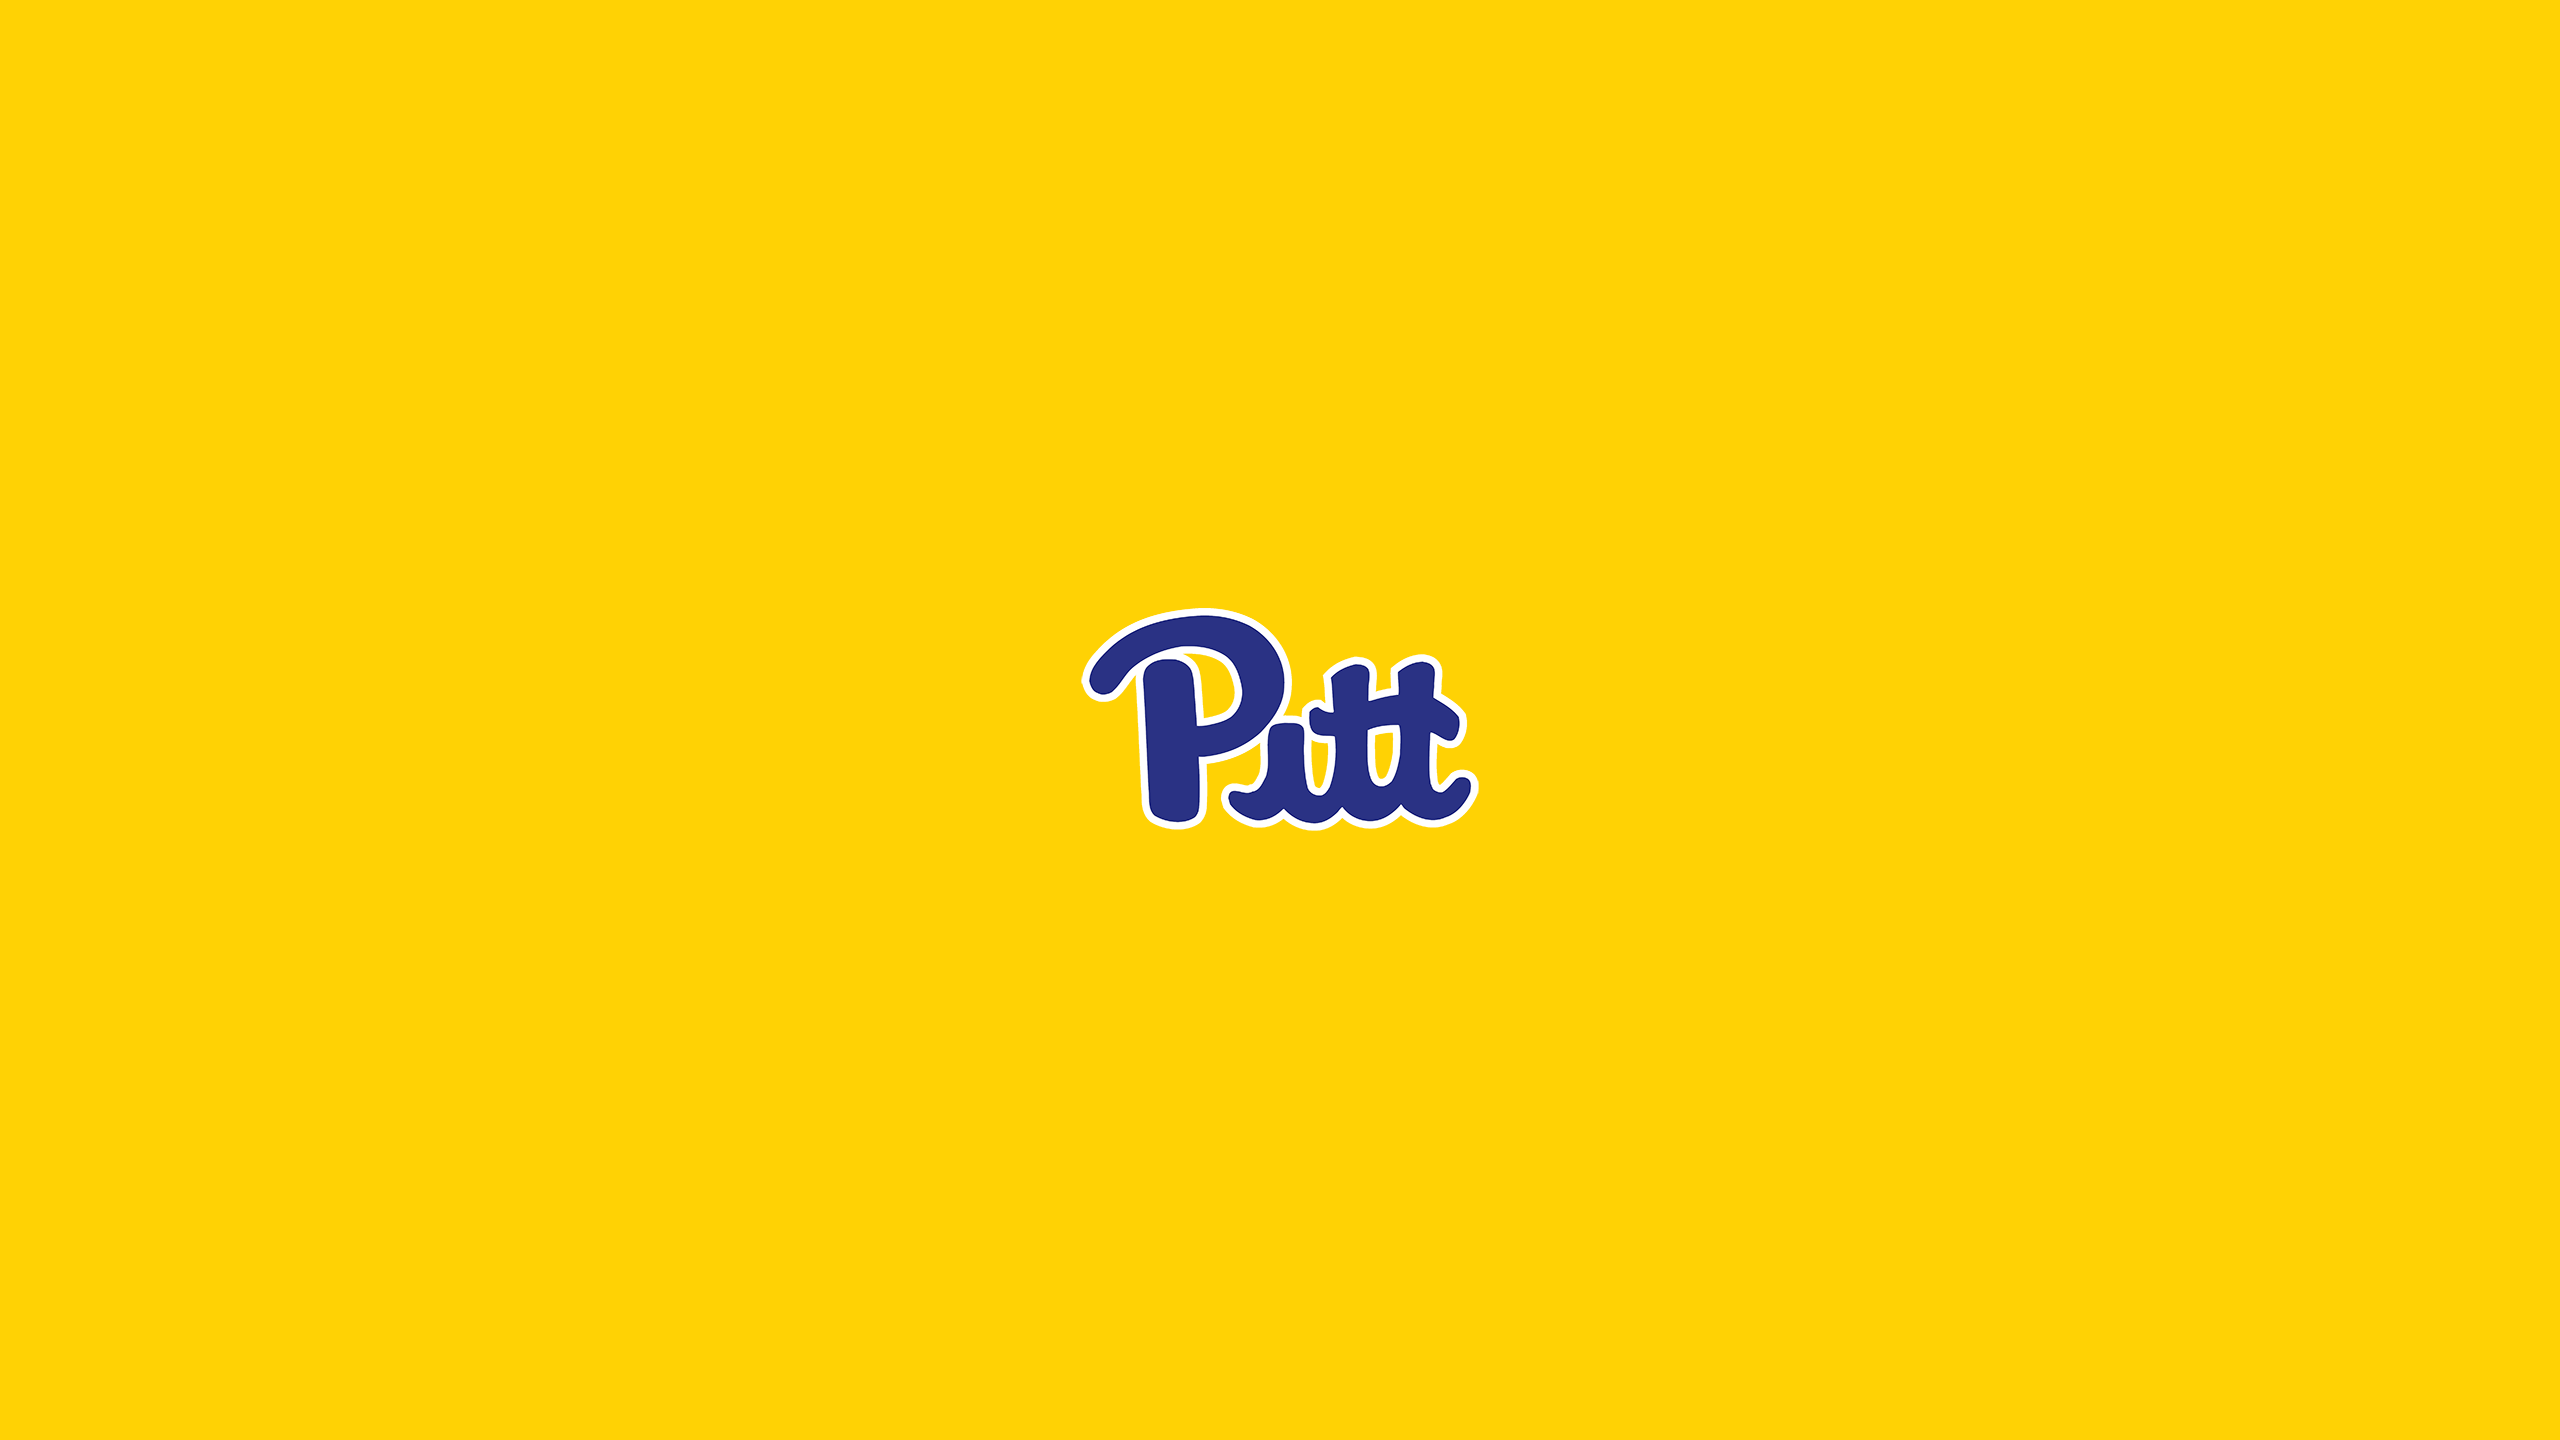 Pittsburgh Panthers Football - NCAAF - Square Bettor